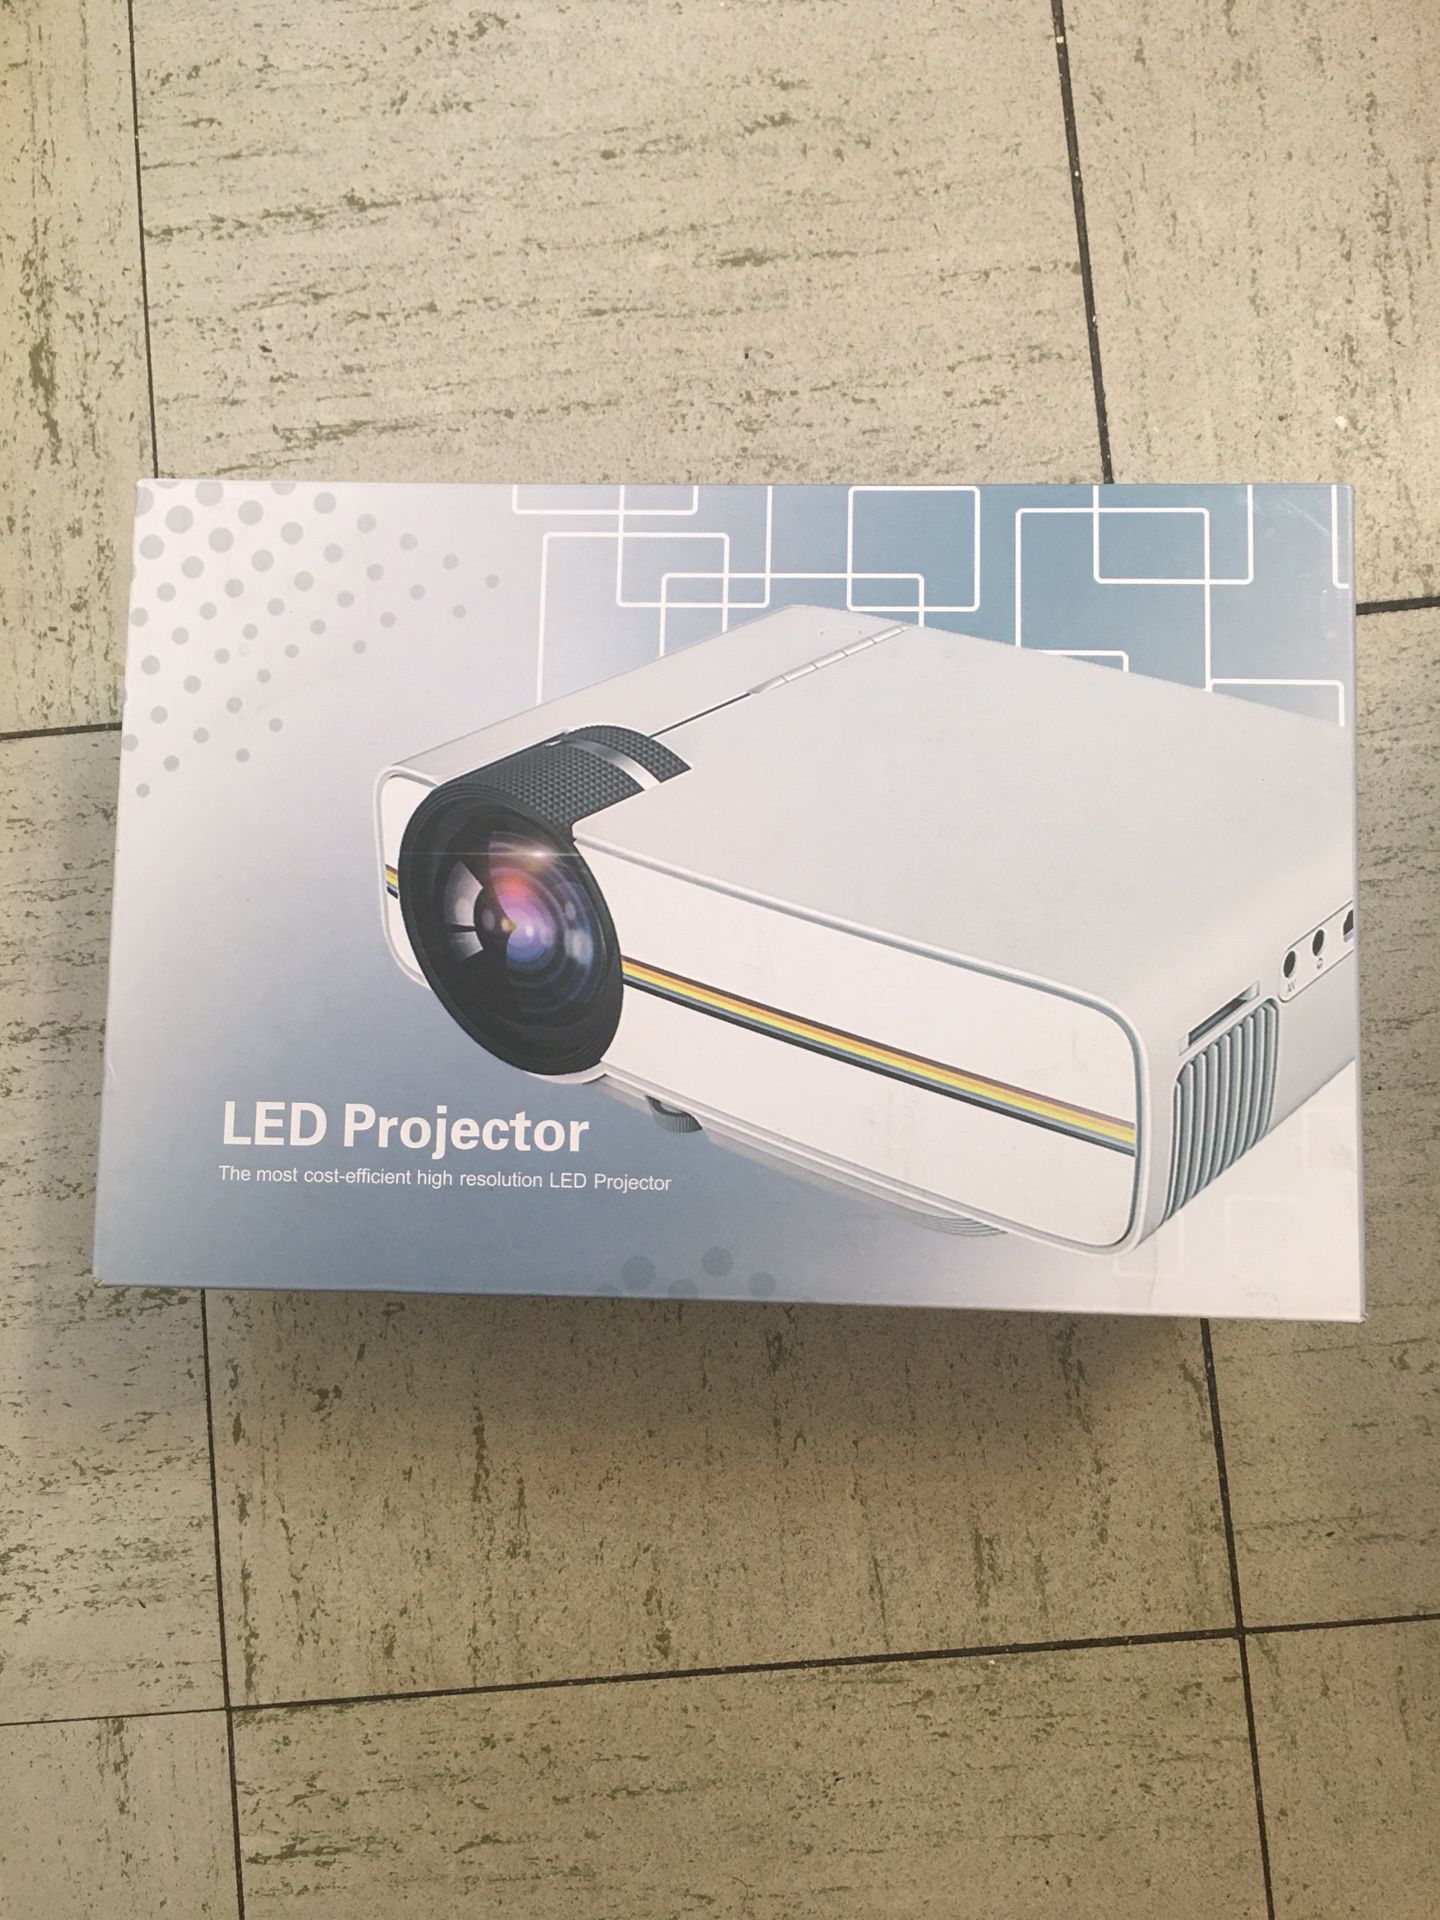 LED Projector with all the cables and remote